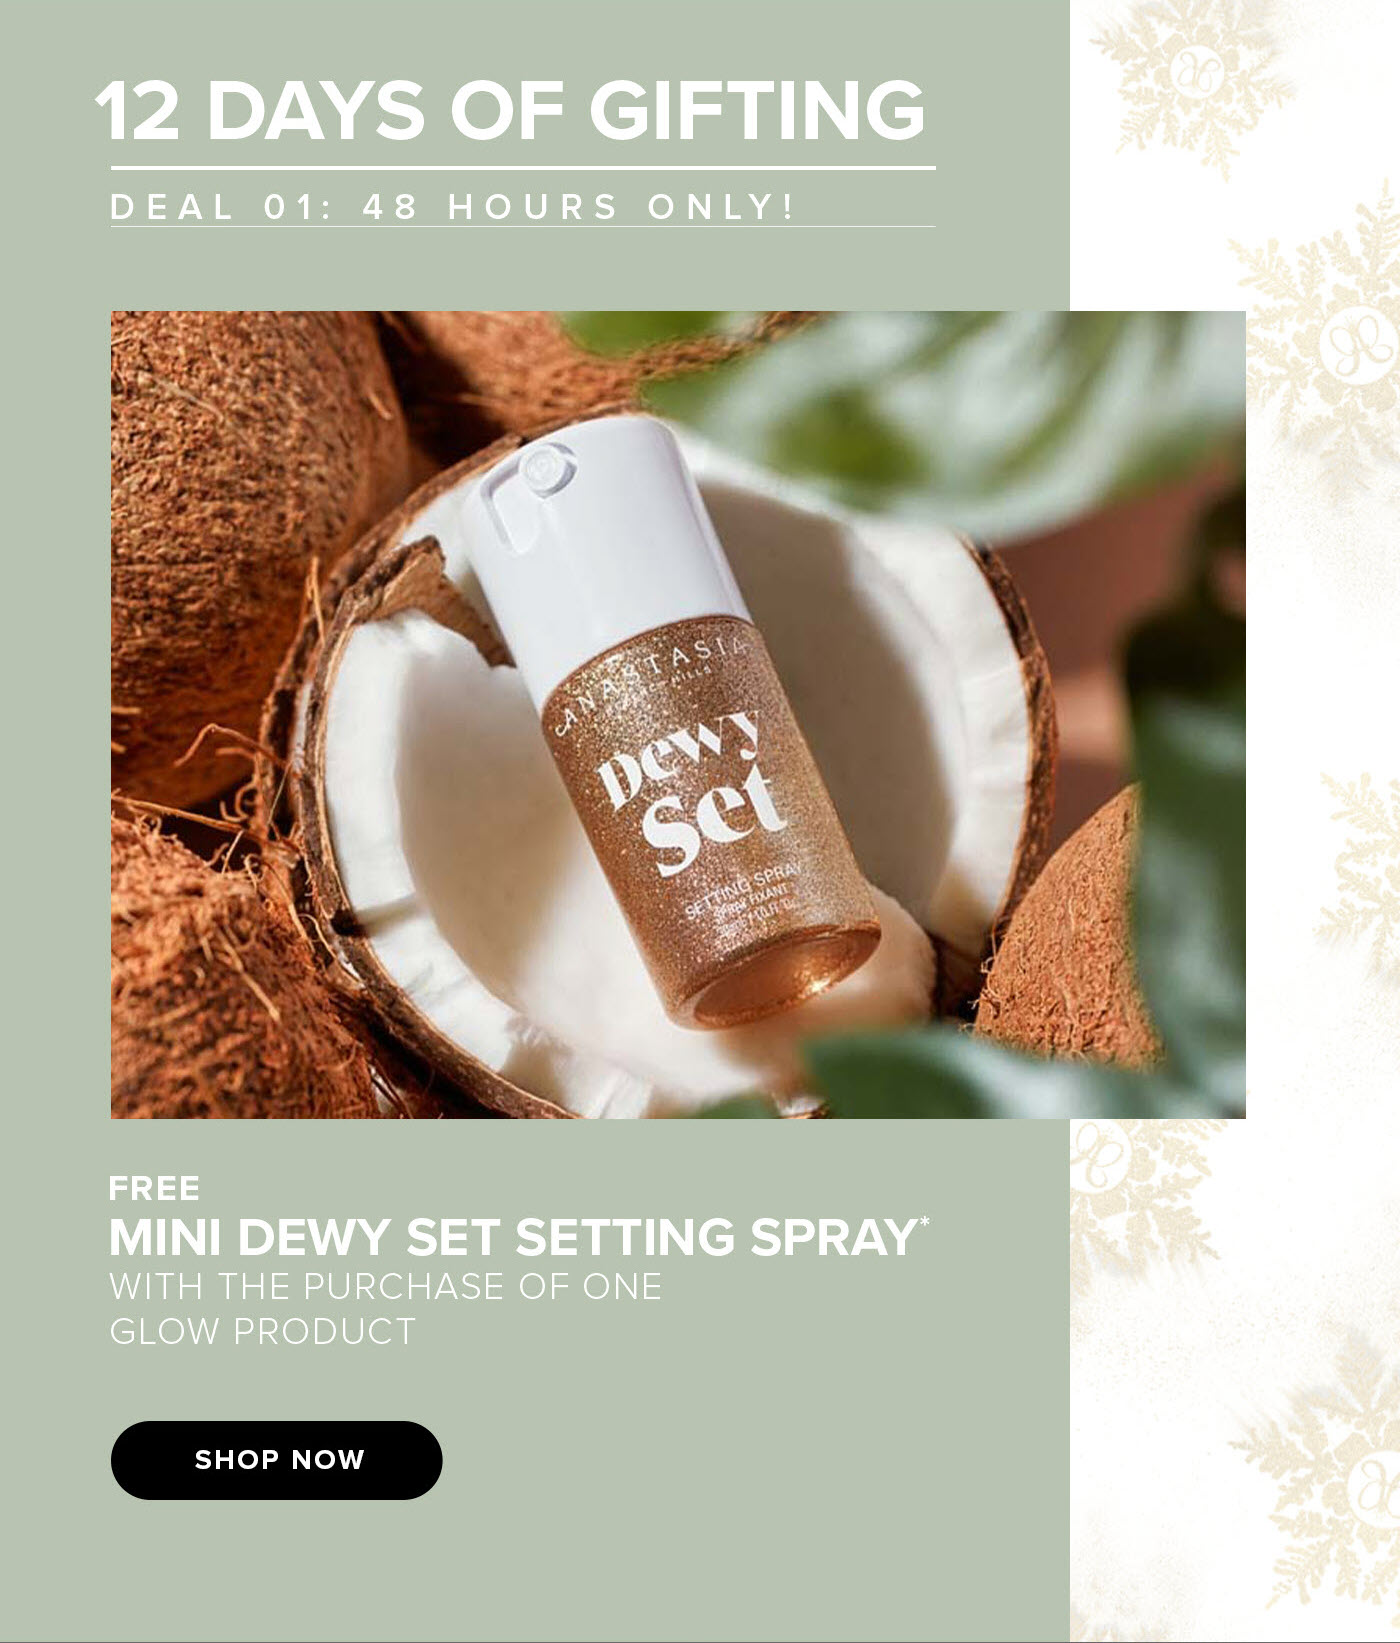 12 Days of Gifting - Deal 01: FREE Mini Dewy Set Setting Spray with the Purchase of One Glow Product